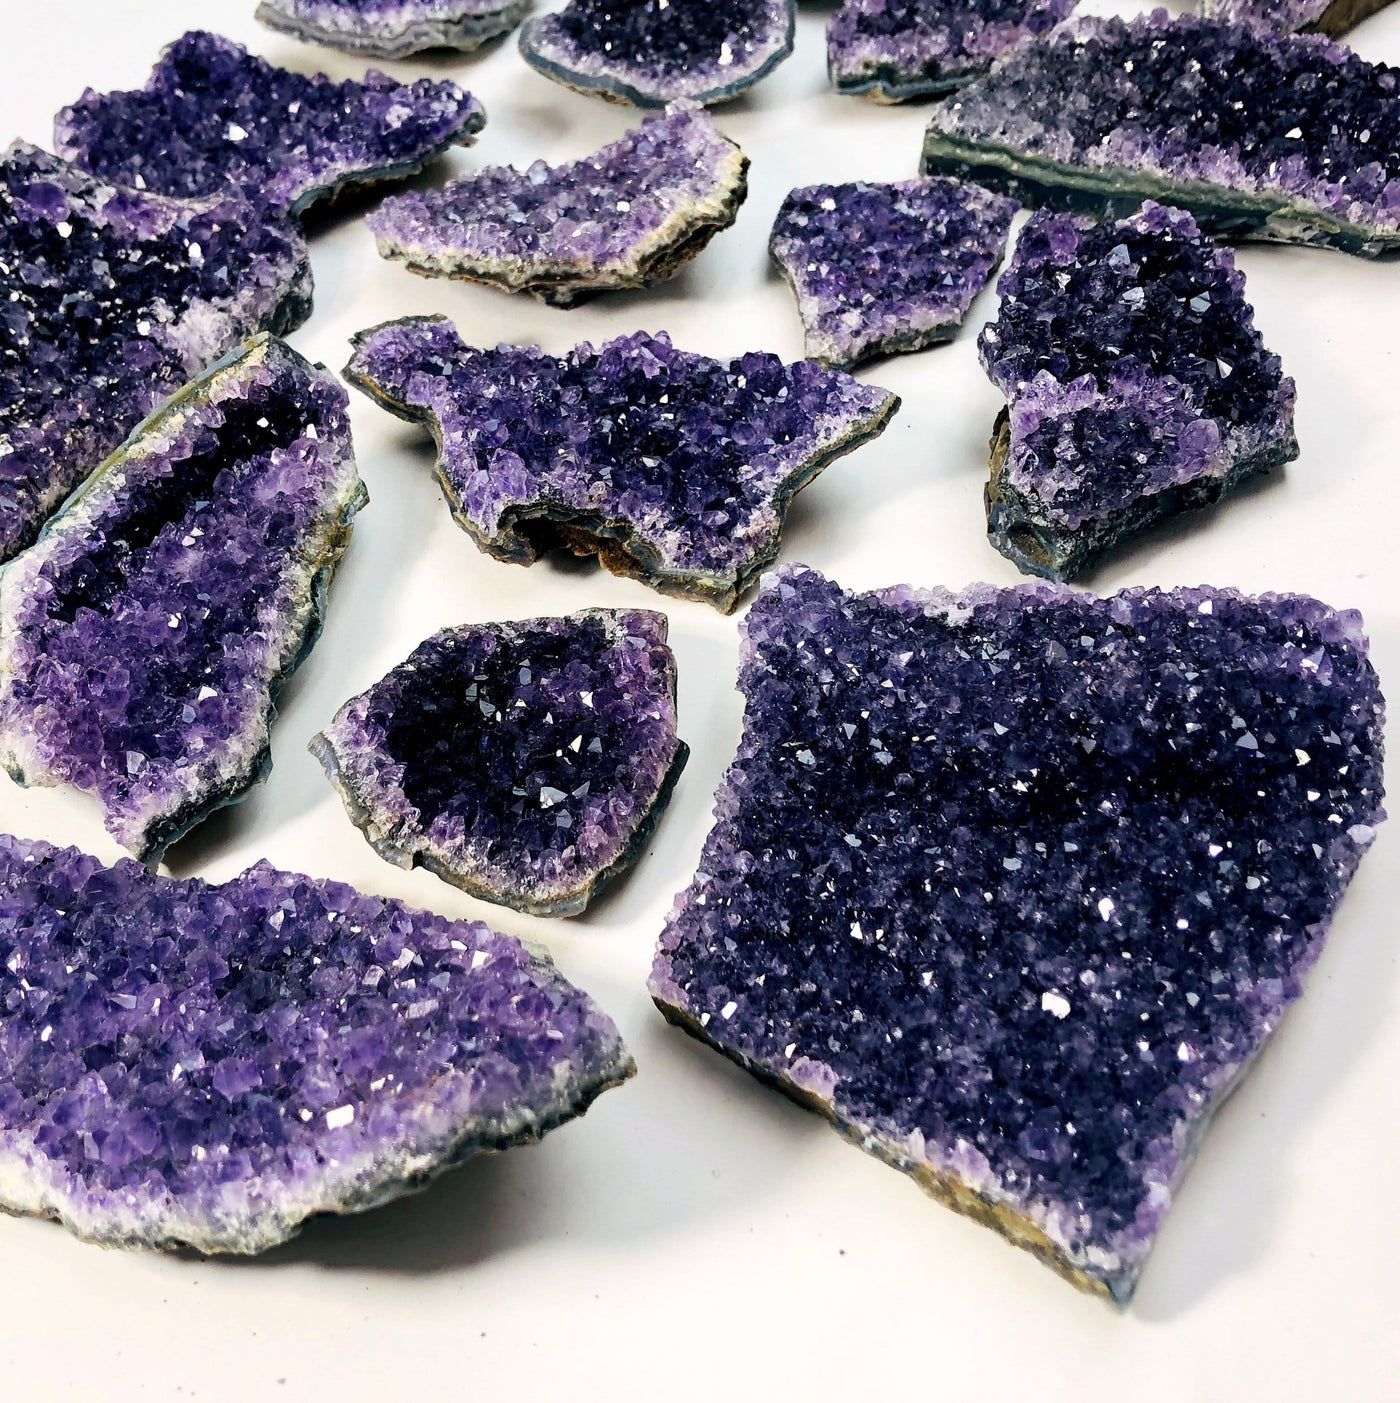 amethyst clusters on white background